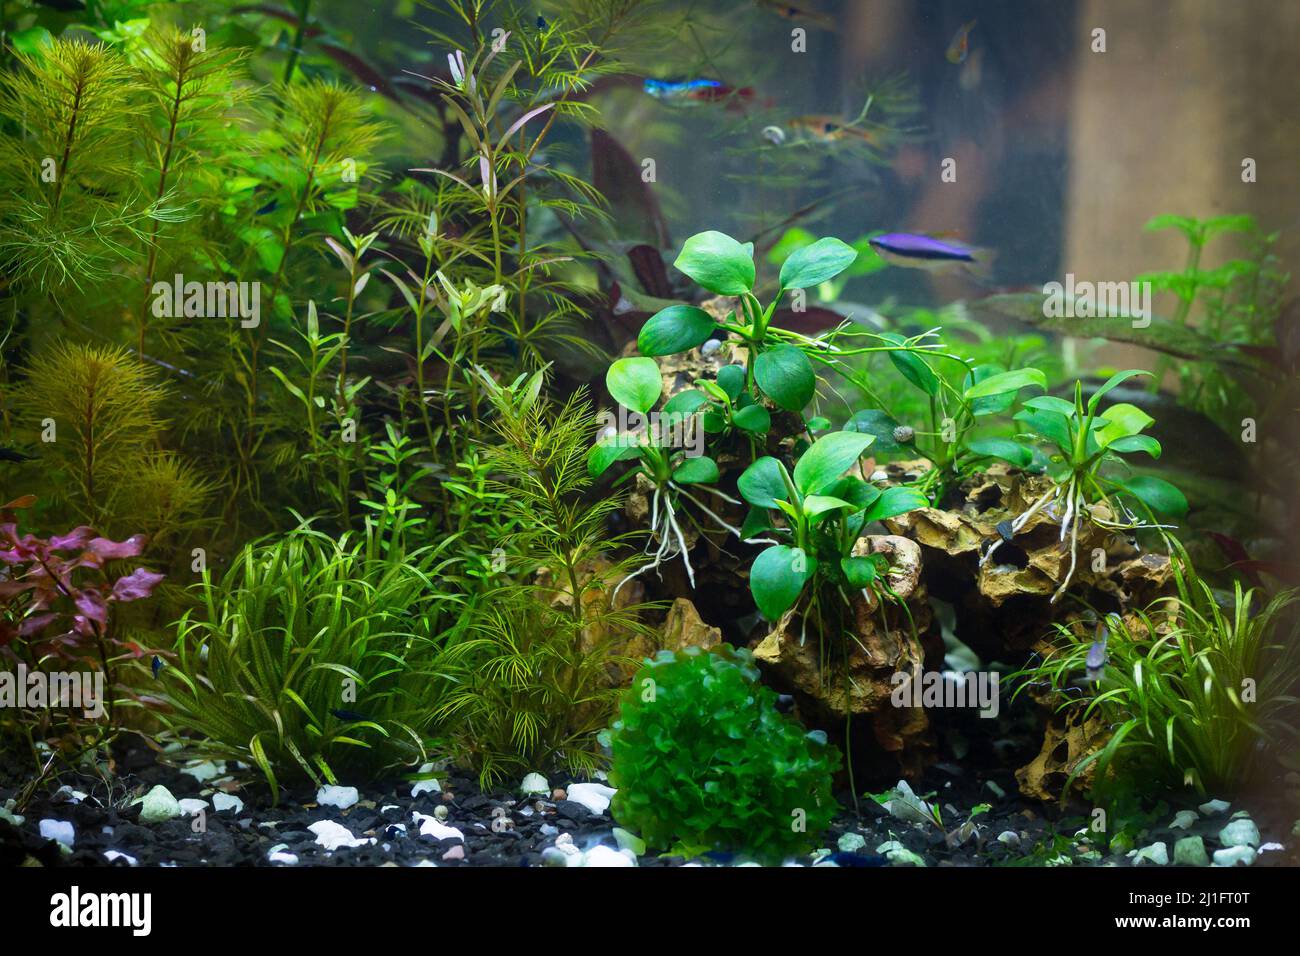 Beautiful tropical freshwater aquarium with plants, moss and fish Stock Photo